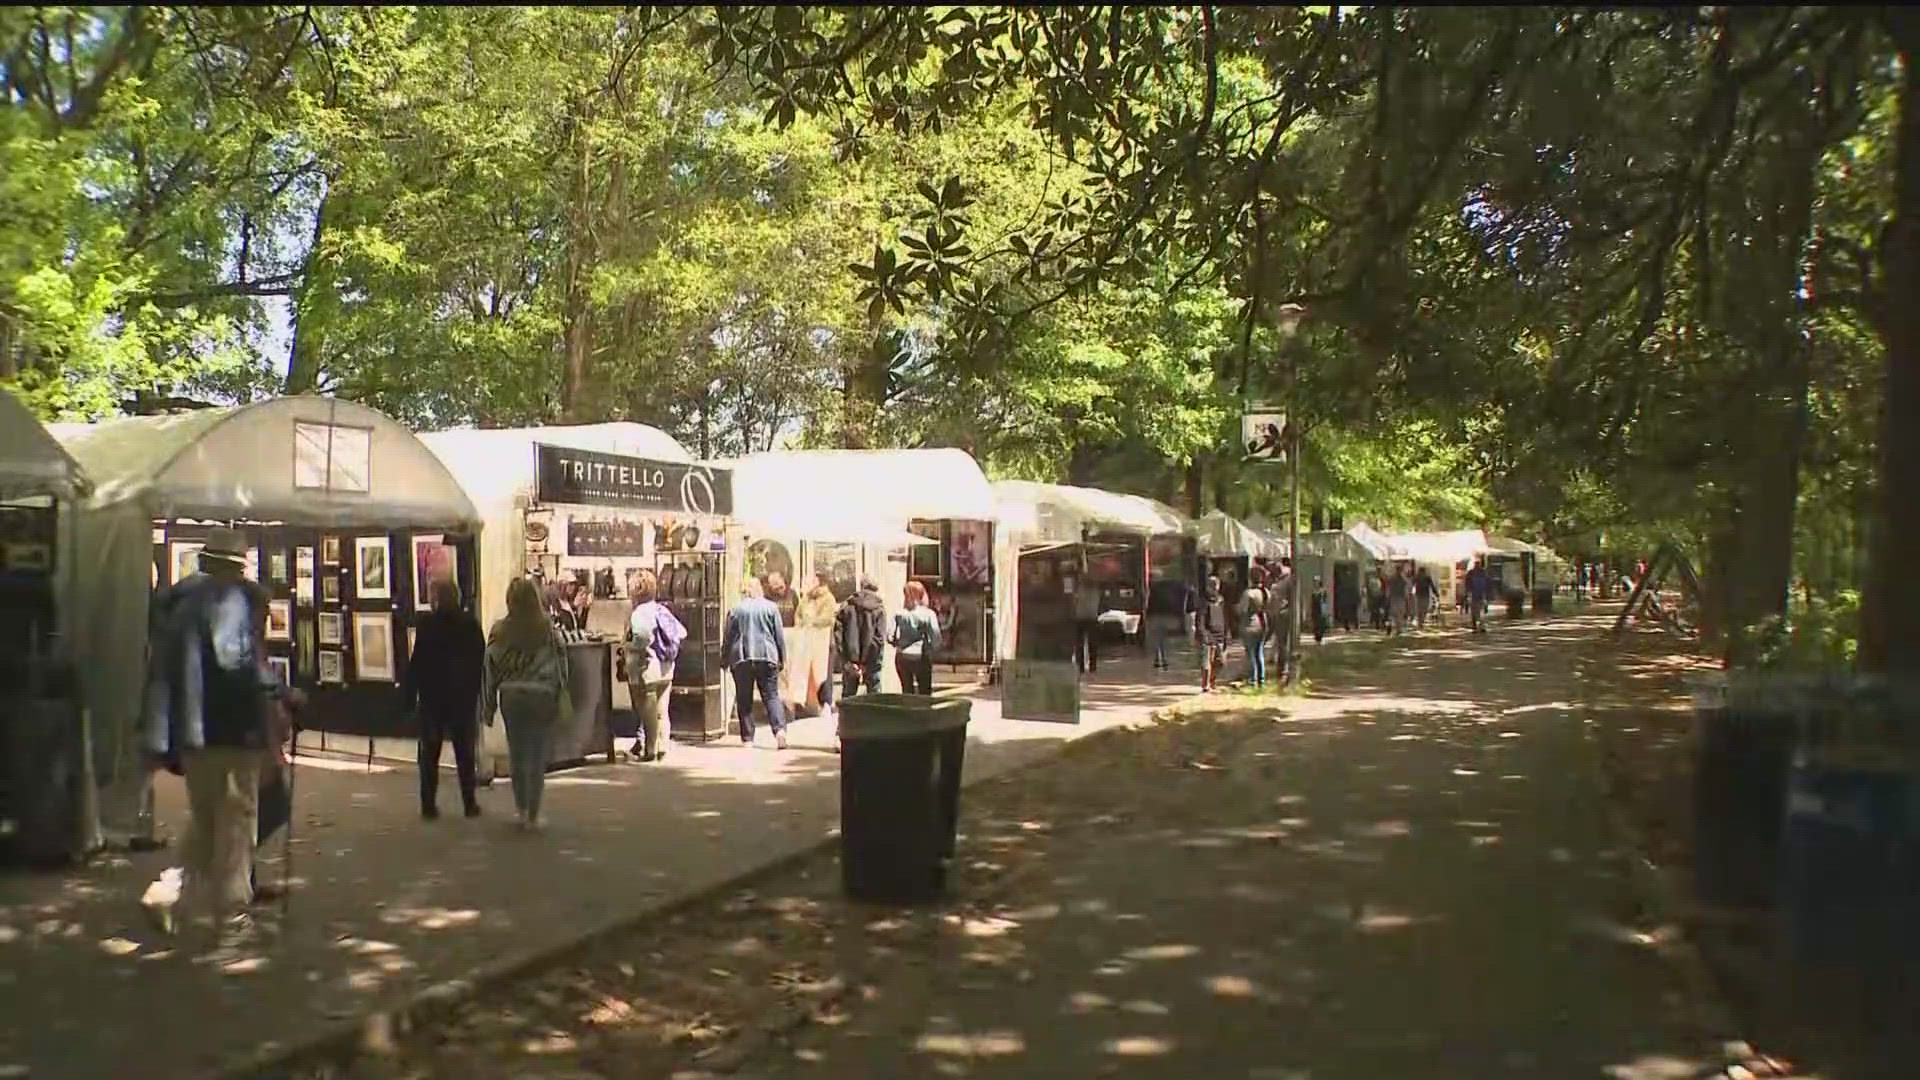 The longest-running festival in the city is back for the 88th time at Piedmont Park this weekend, starting on Friday.